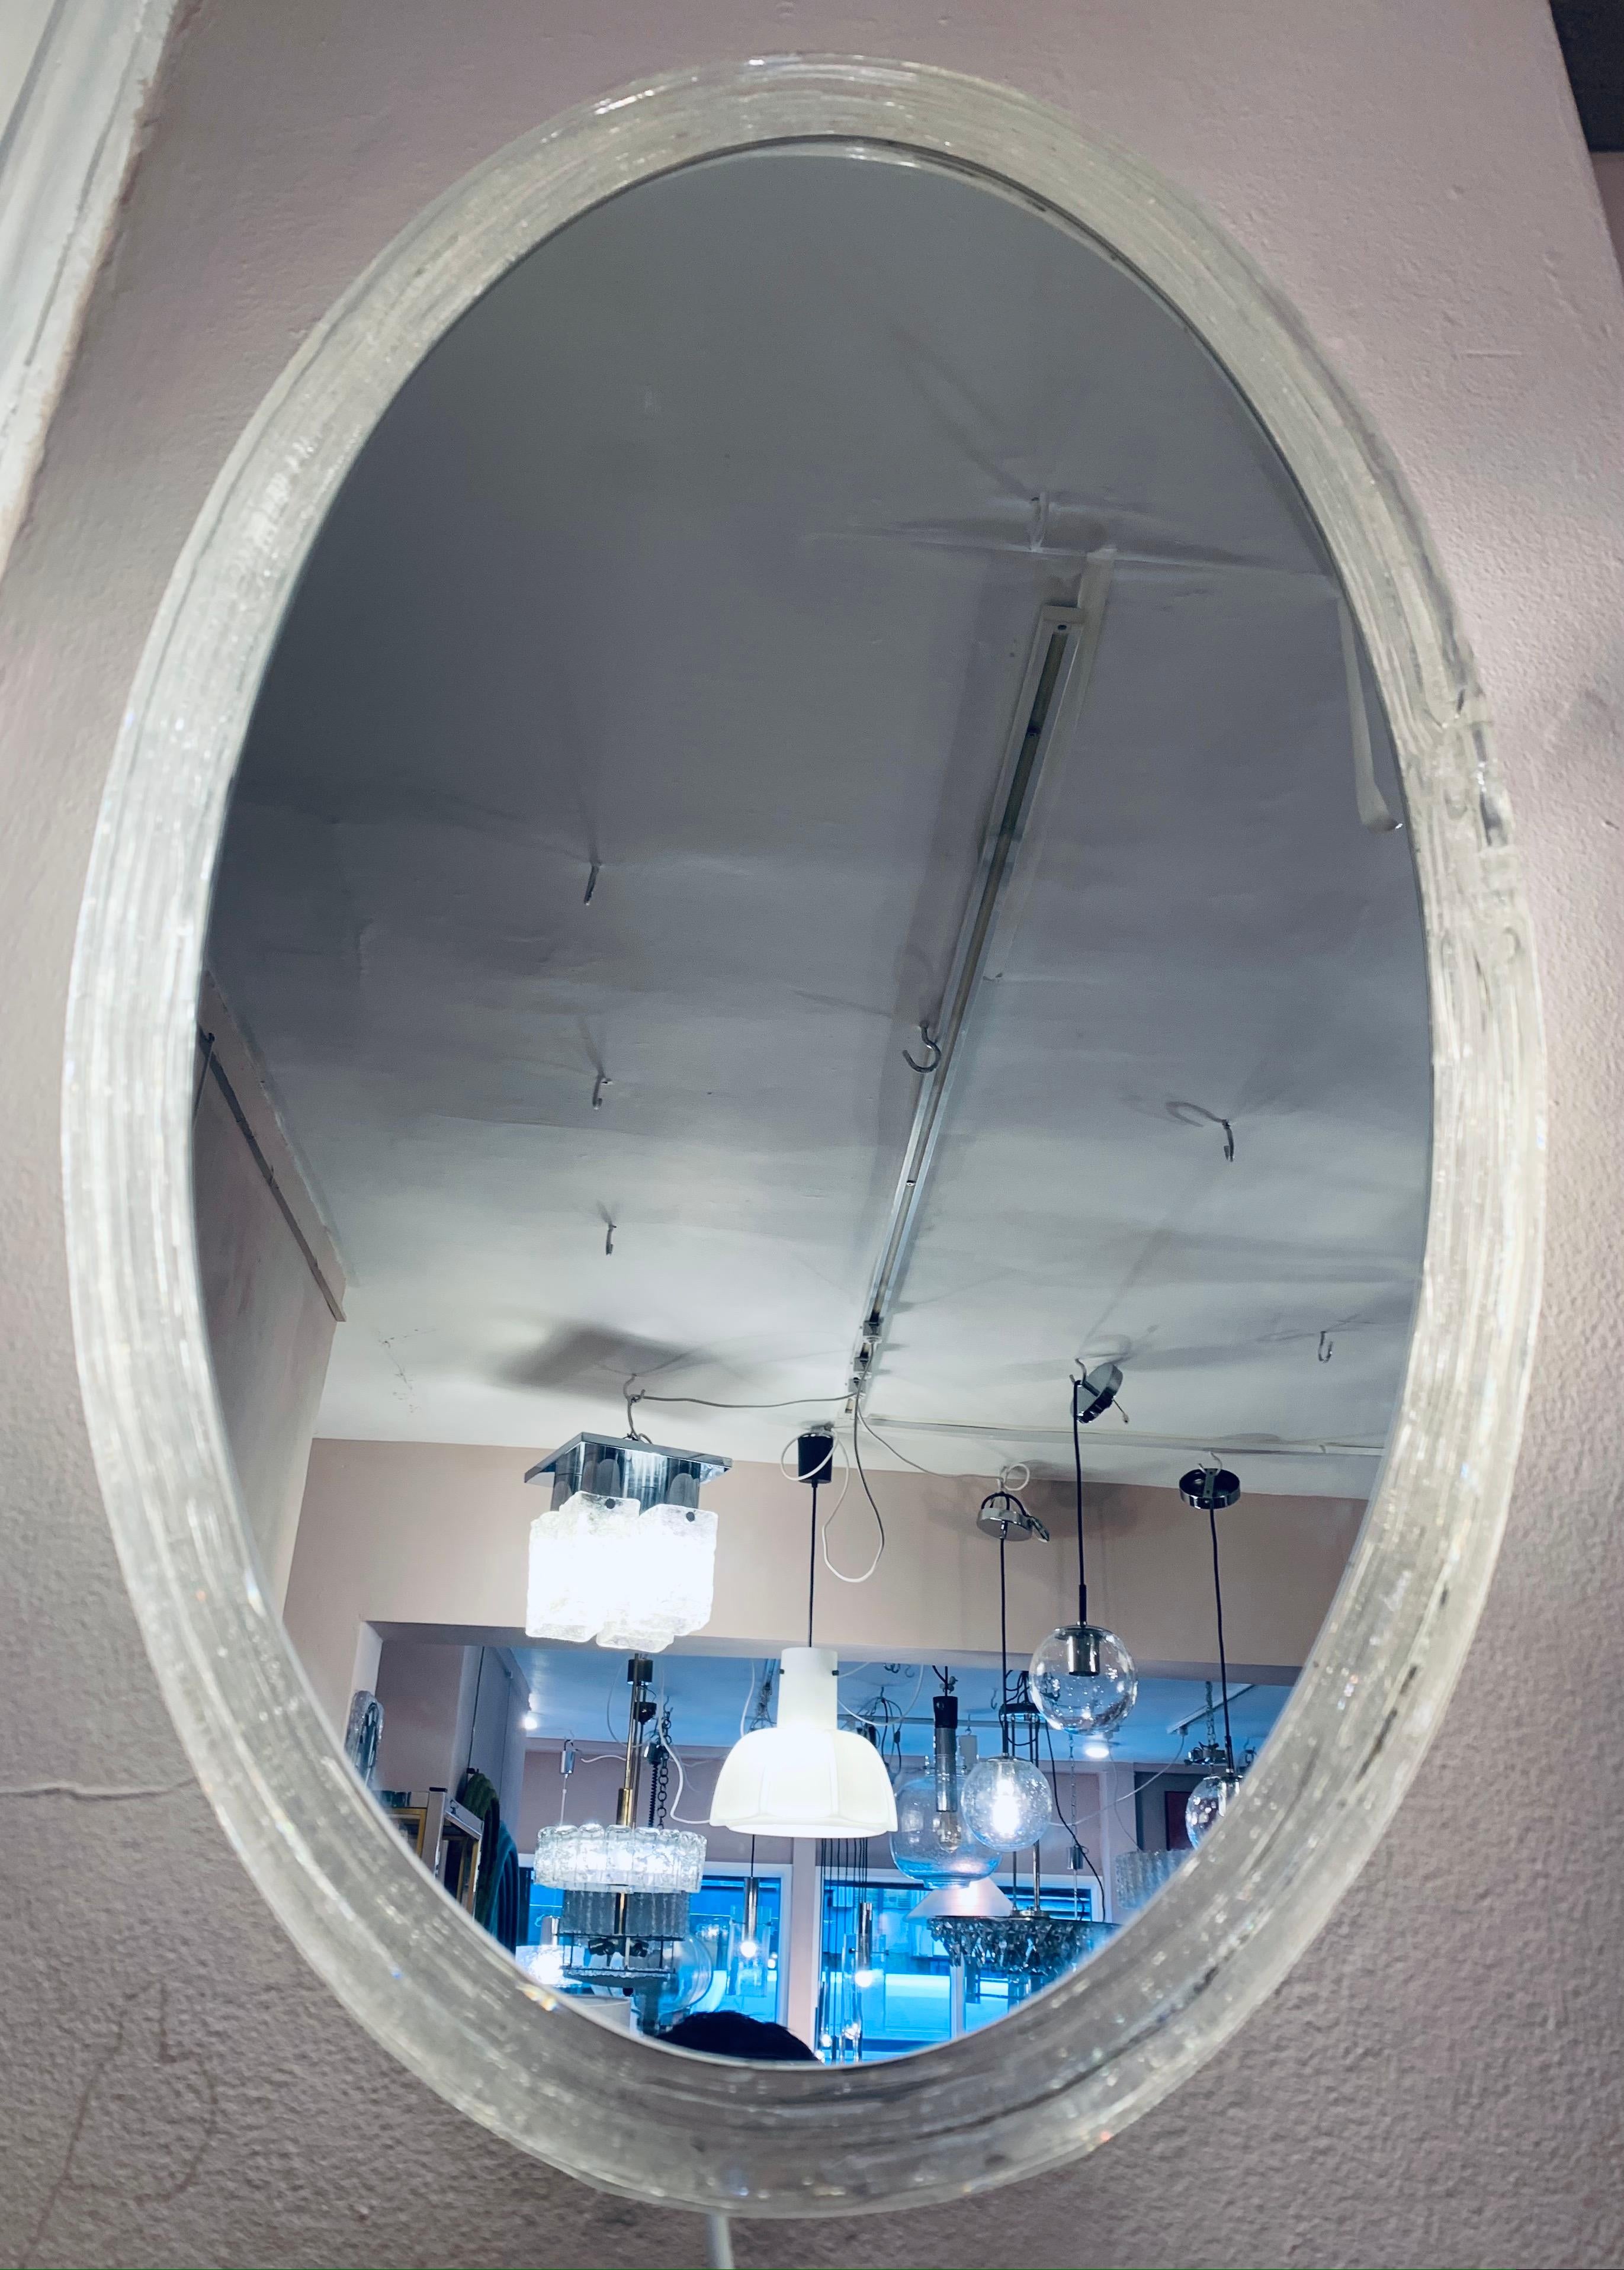 1970s German illuminated wall mirror manufactured by Hillebrand Lighting and designed by Egon Hillebrand. The mirror is backlit which allows the light to shine beautifully through the oval lucite frame which the mirrored-glass sits snugly within.